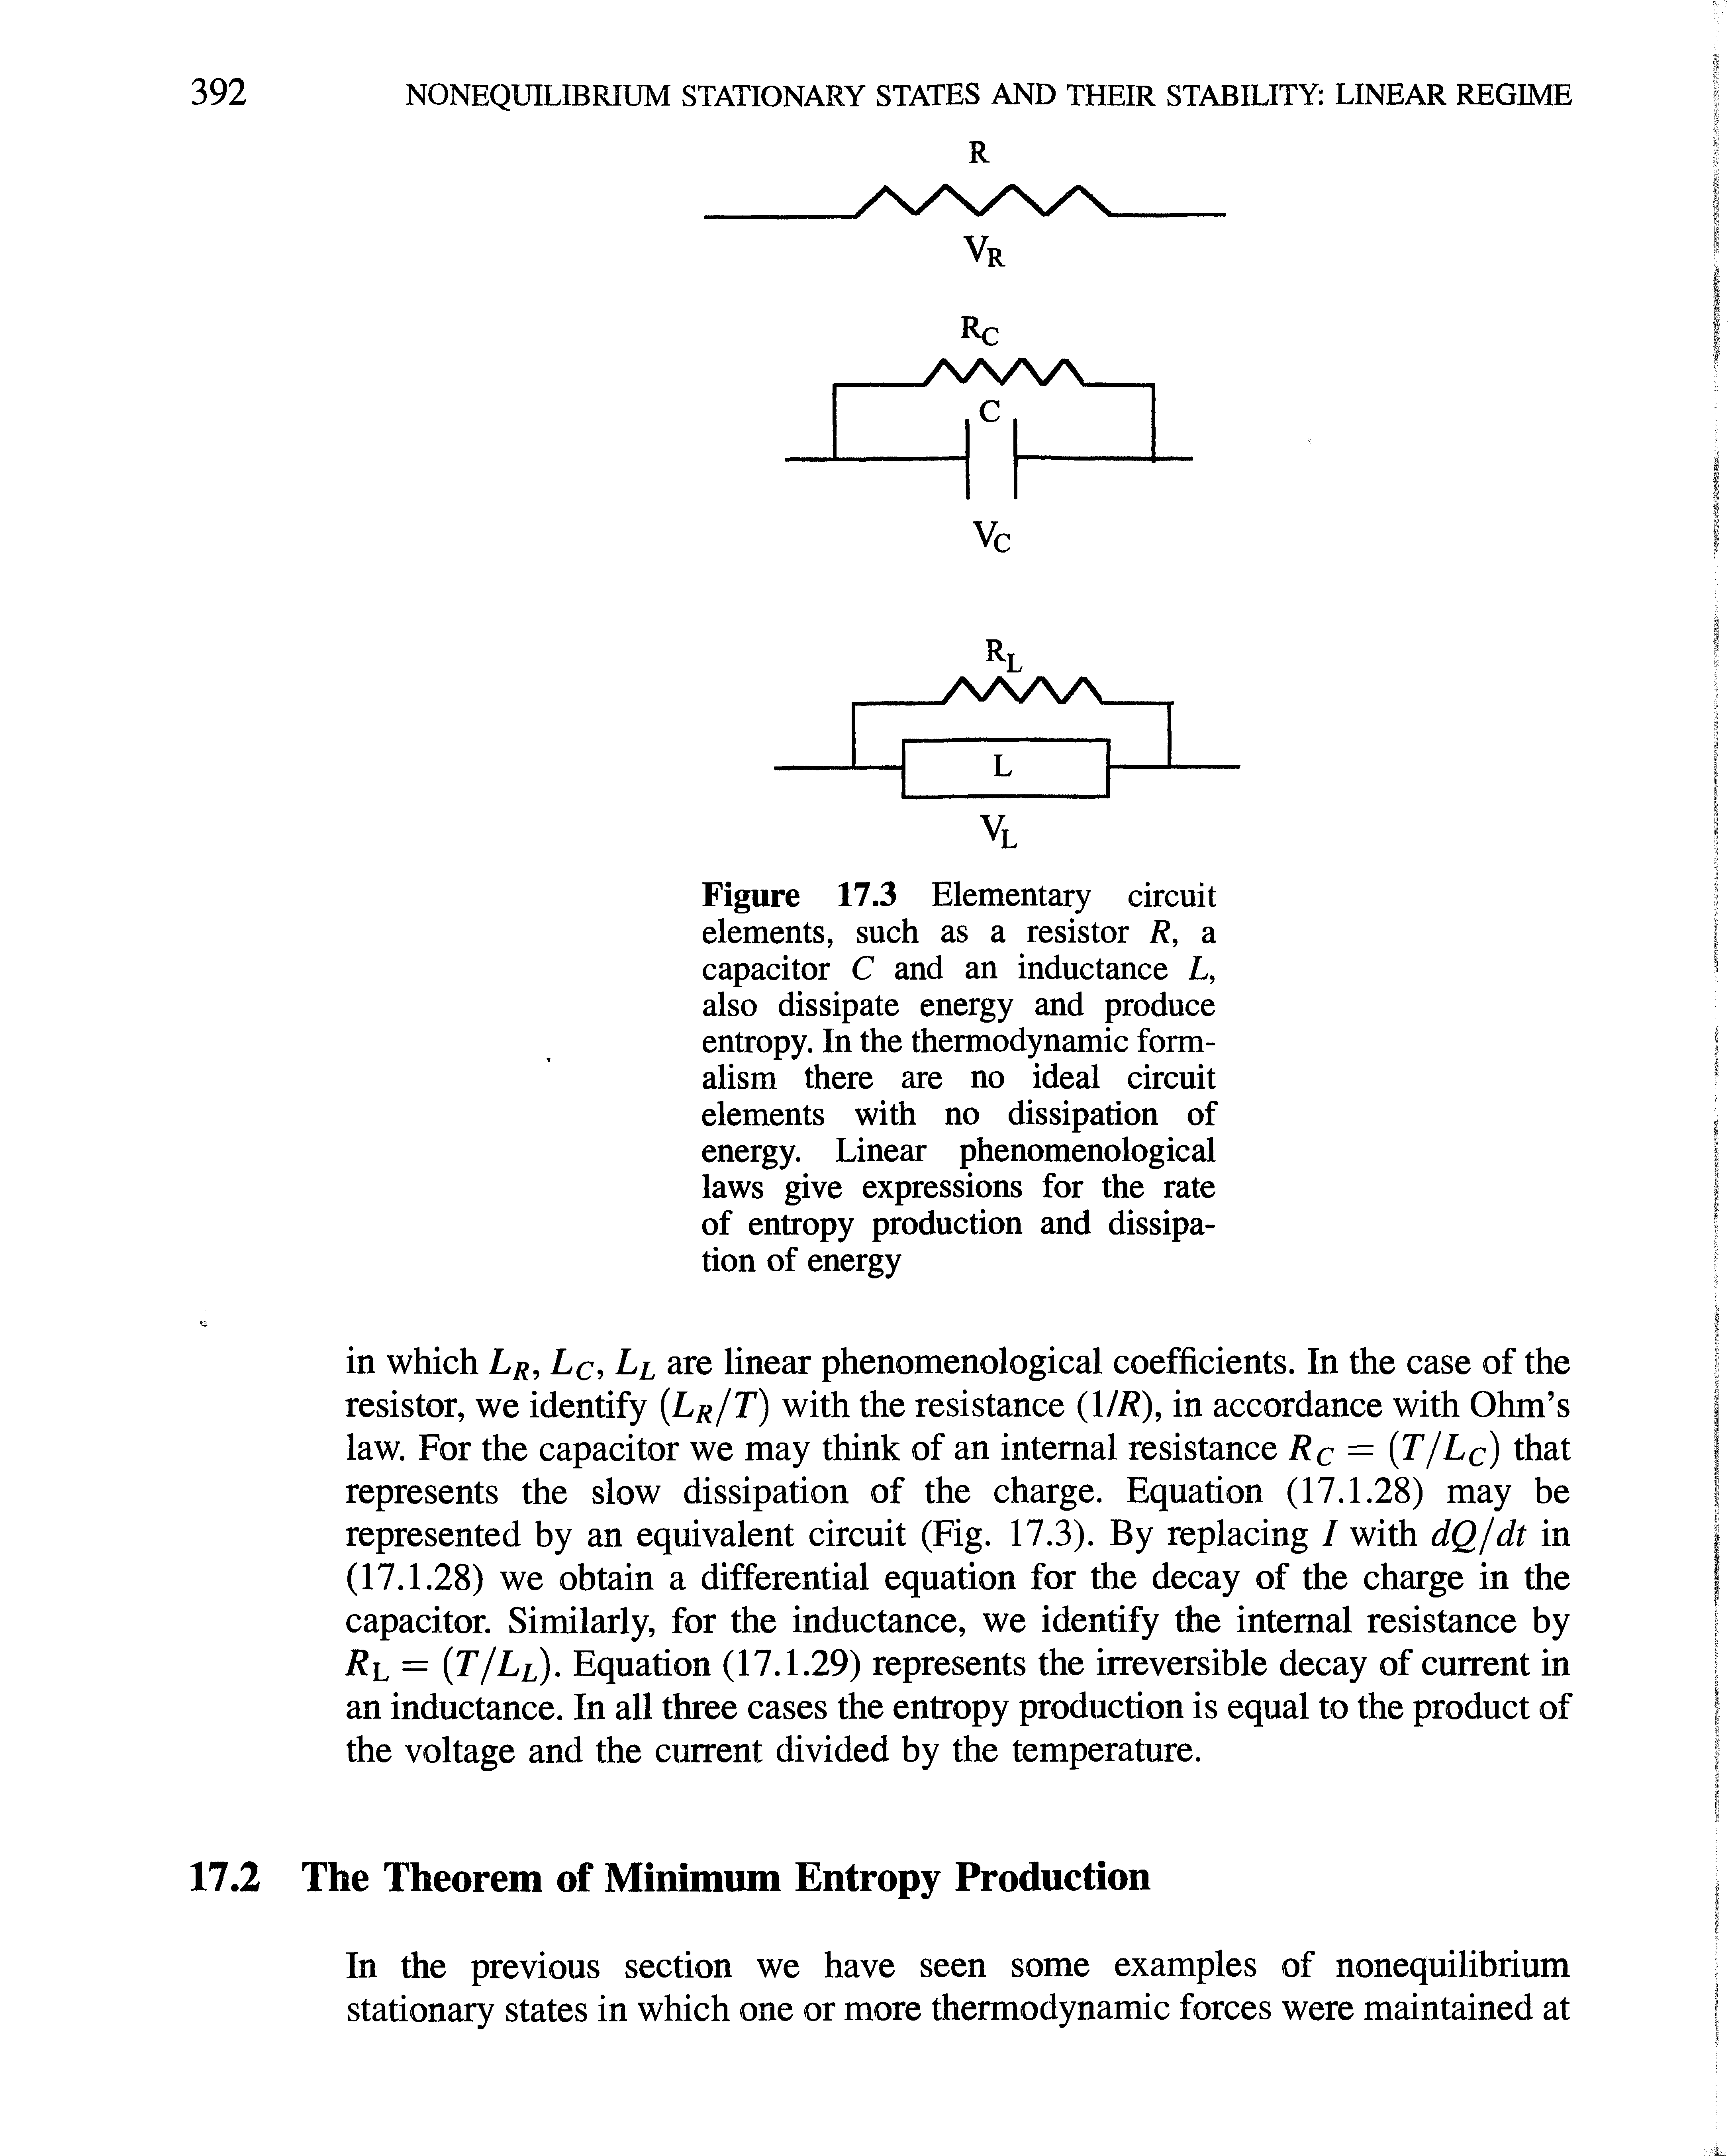 Figure 17.3 Elementary circuit elements, such as a resistor R, a capacitor C and an inductance L, also dissipate energy and produce entropy. In the thermodynamic formalism there are no ideal circuit elements with no dissipation of energy. Linear phenomenological laws give expressions for the rate of entropy production and dissipation of energy...